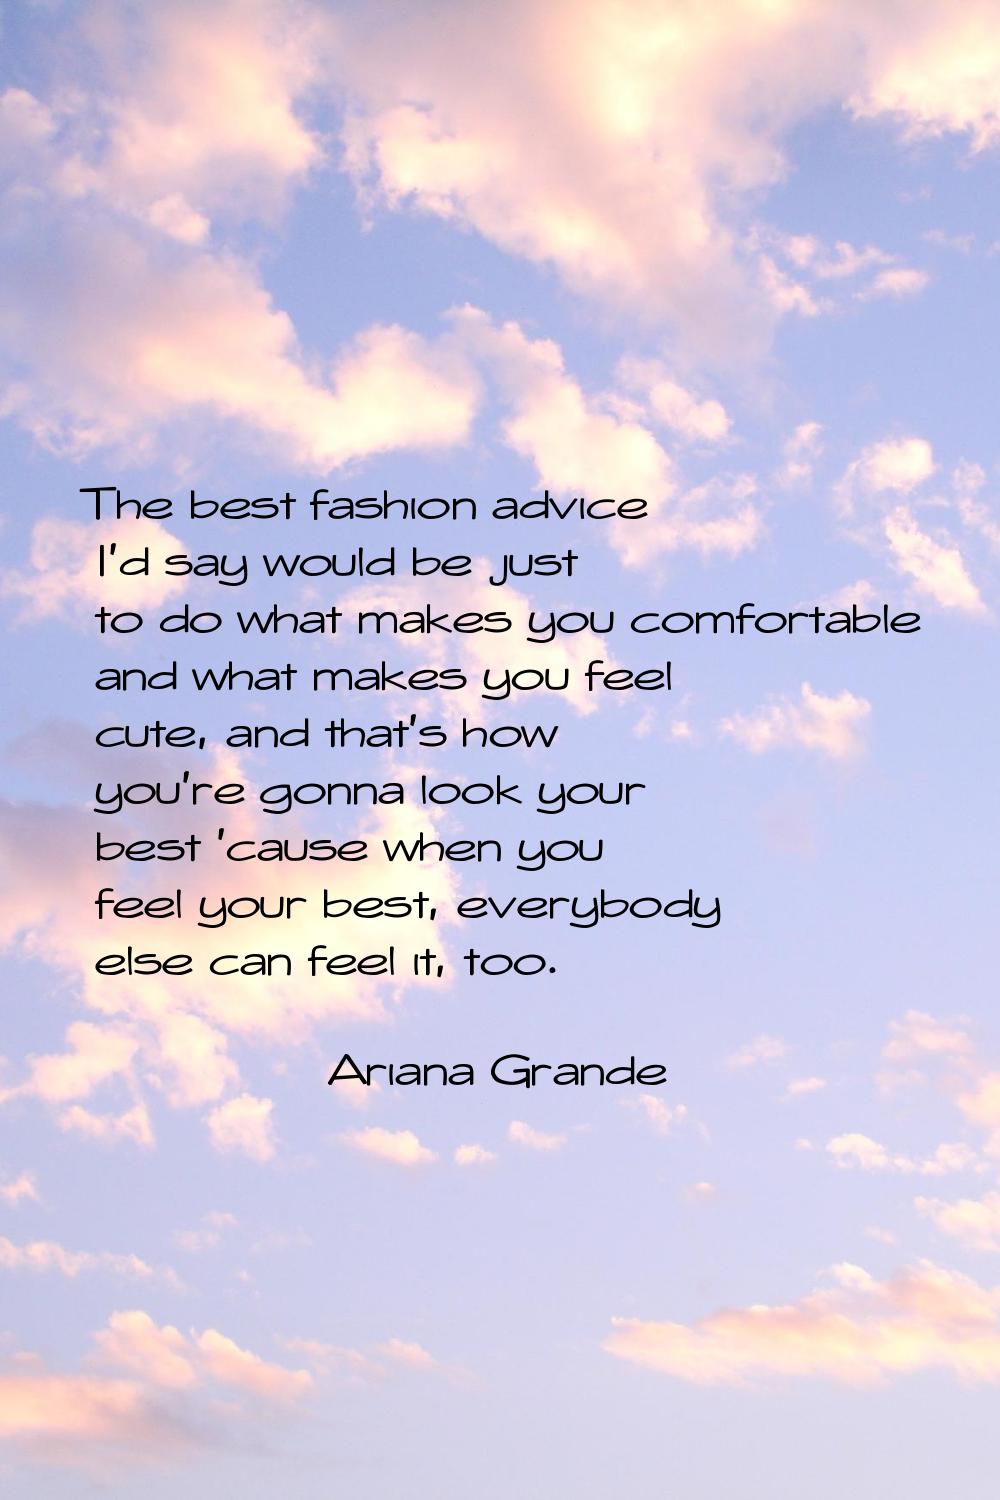 The best fashion advice I'd say would be just to do what makes you comfortable and what makes you f